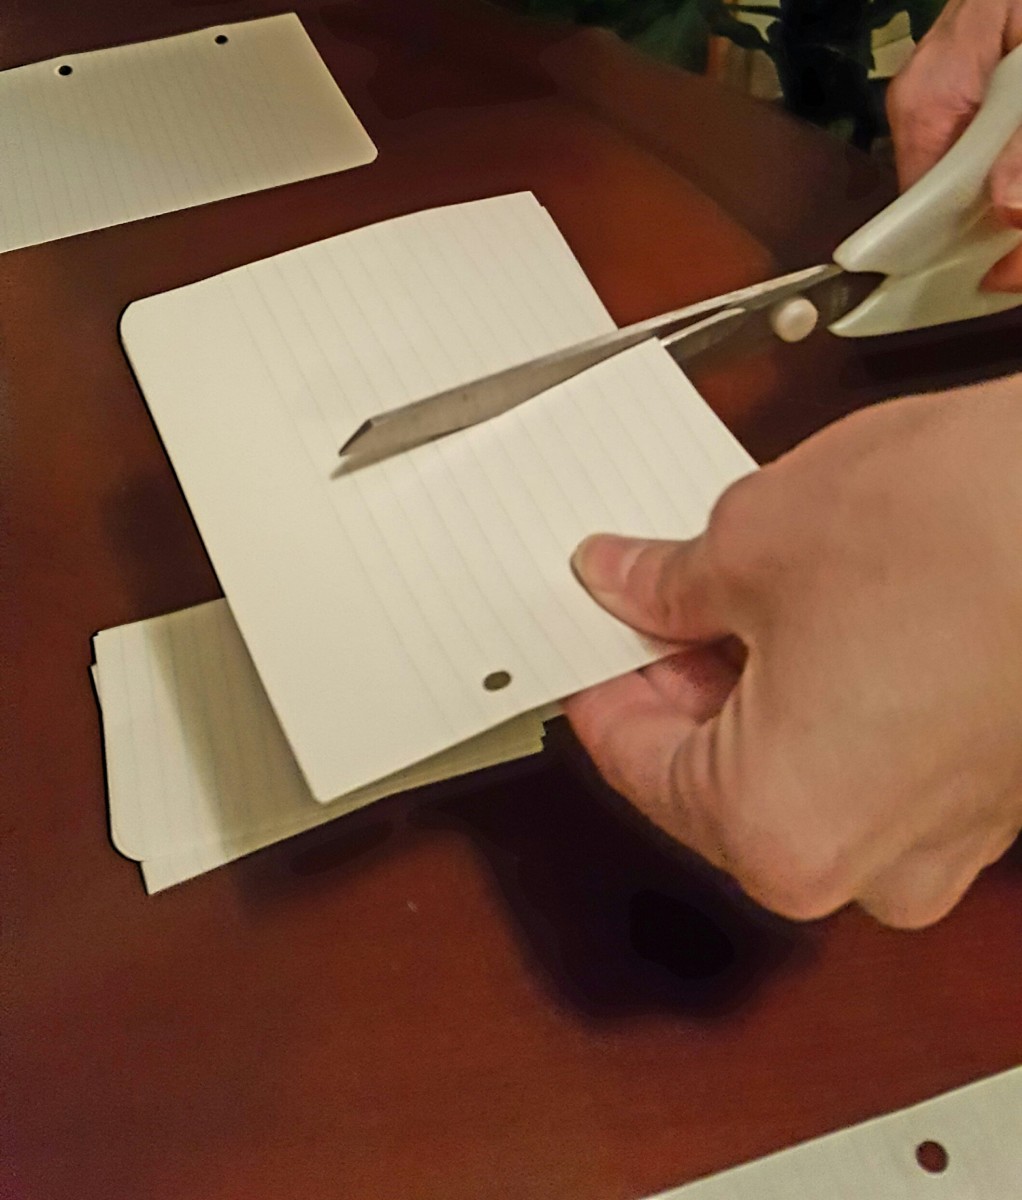 Continue cutting paper in half to make small to medium sized squares. These will be used to write daily "gratitudes" and hung up on your Gratitude tree.